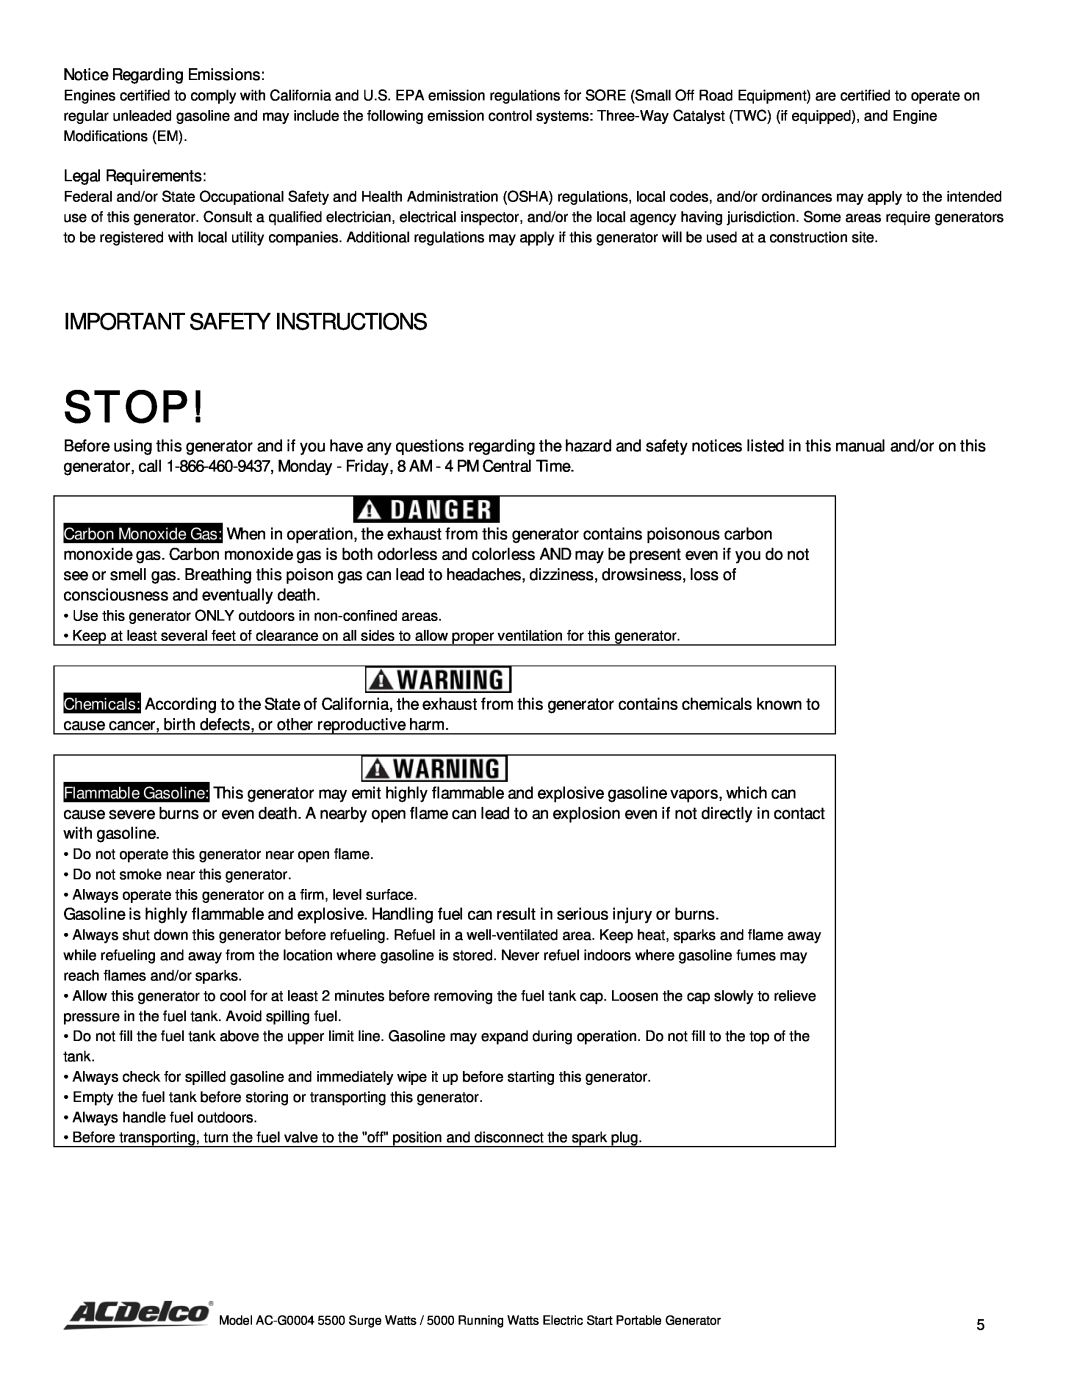 ACDelco AC-G0004 instruction manual Important Safety Instructions, Stop, Notice Regarding Emissions, Legal Requirements 